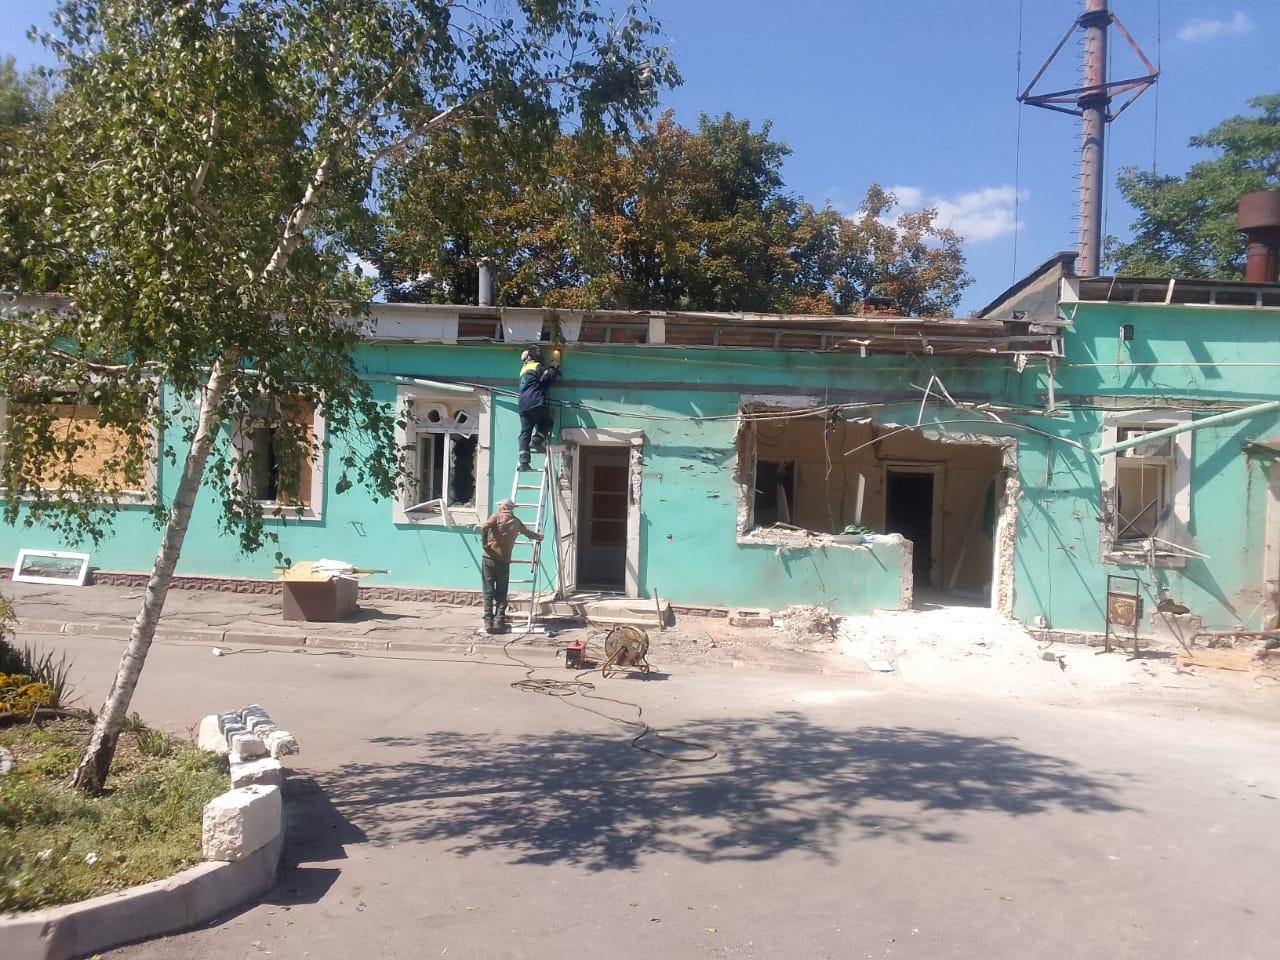 Shelled out hospital building in Kherson